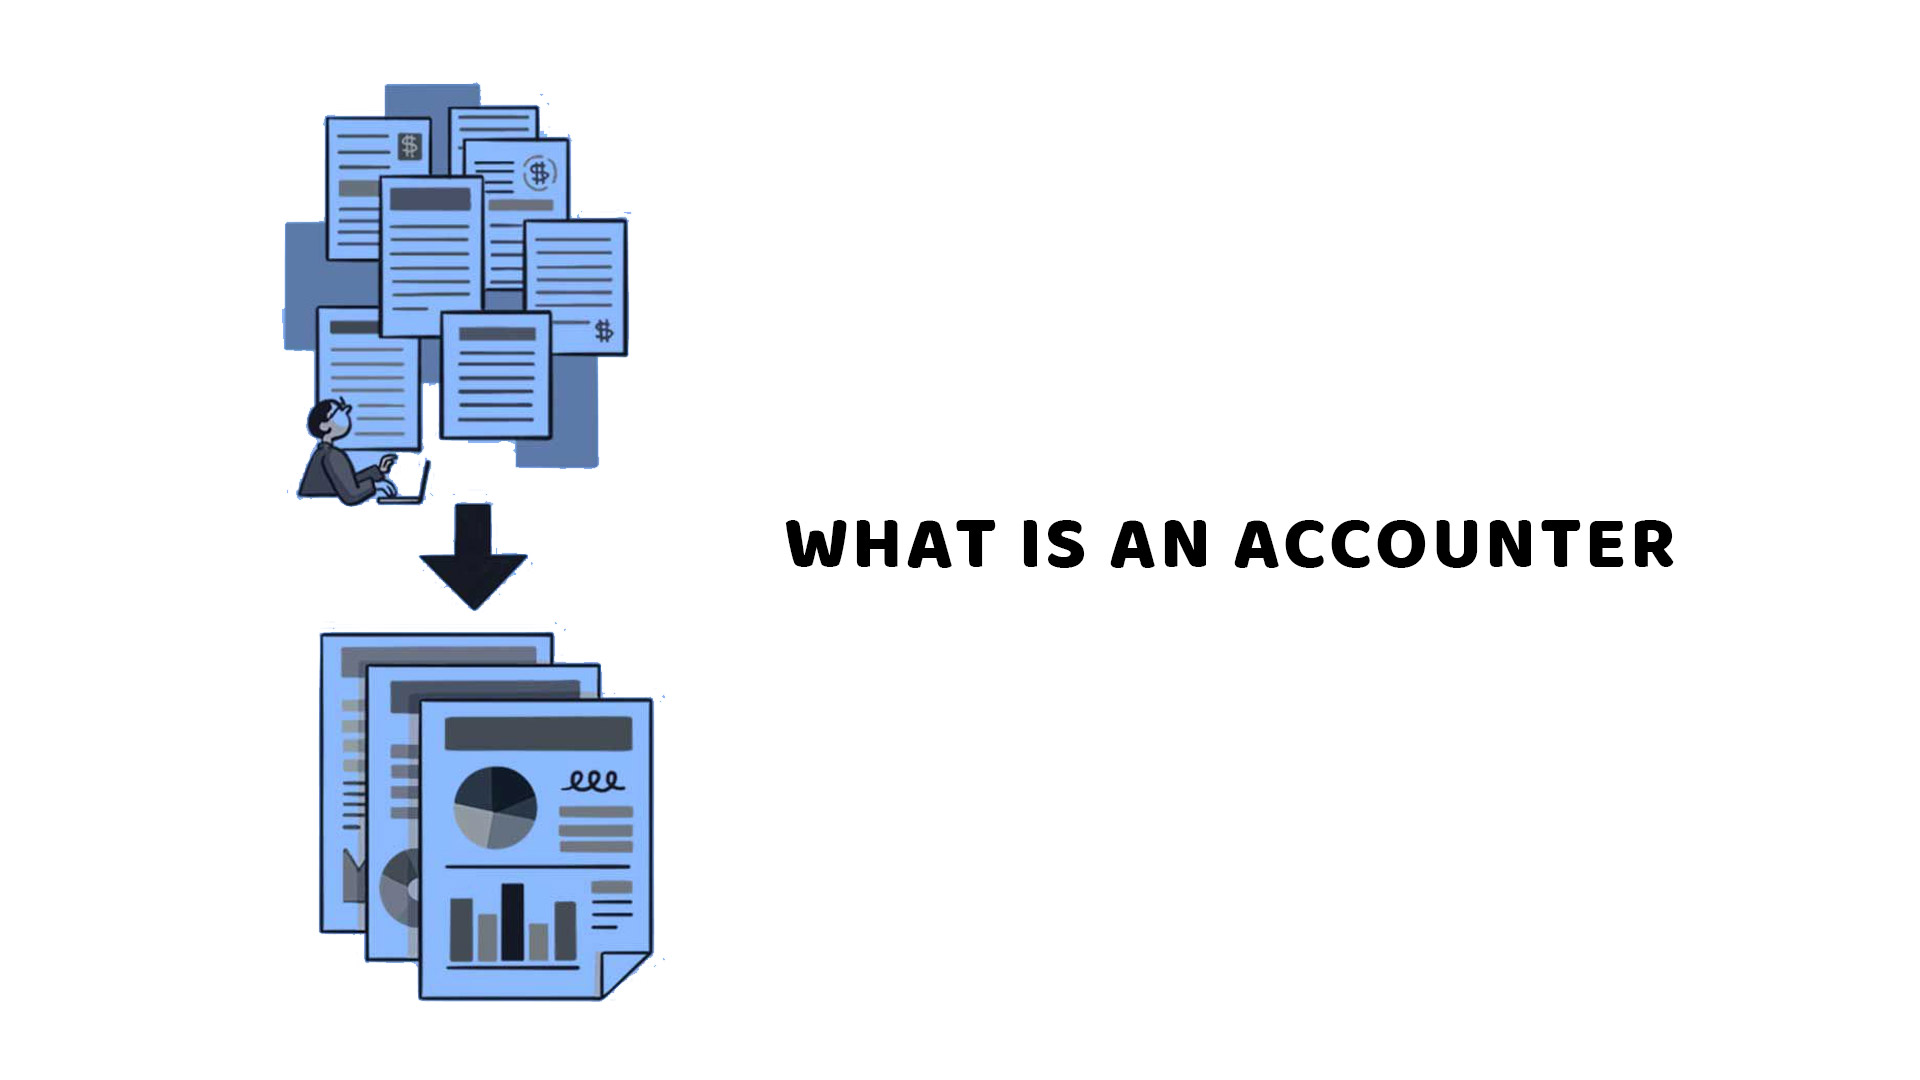 What is an Accounter